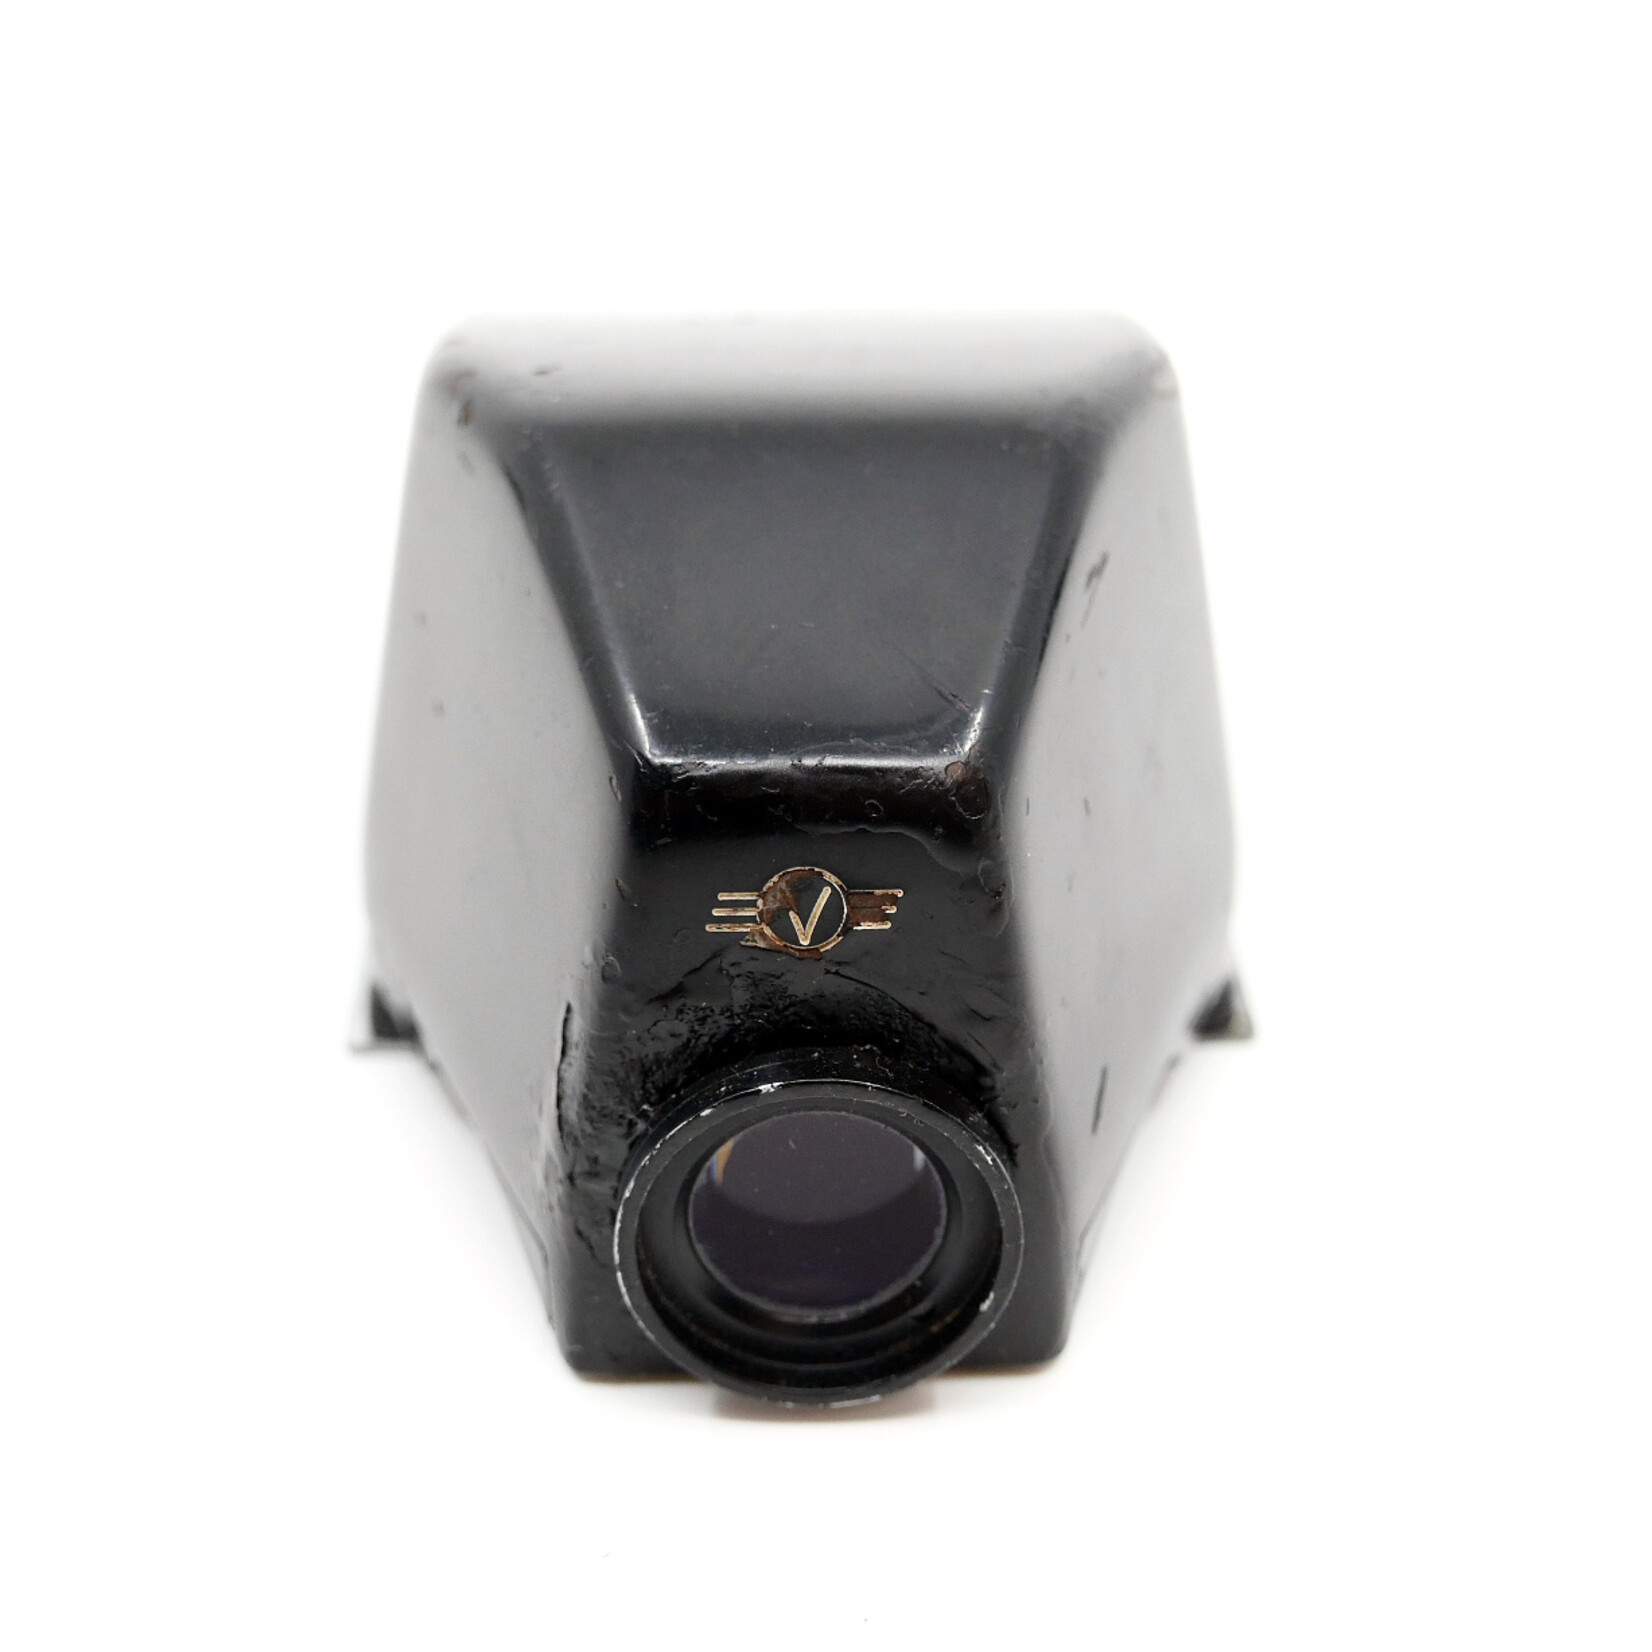 Hasselblad Hasselblad HC1 Eye Level Prism Finder (Used)